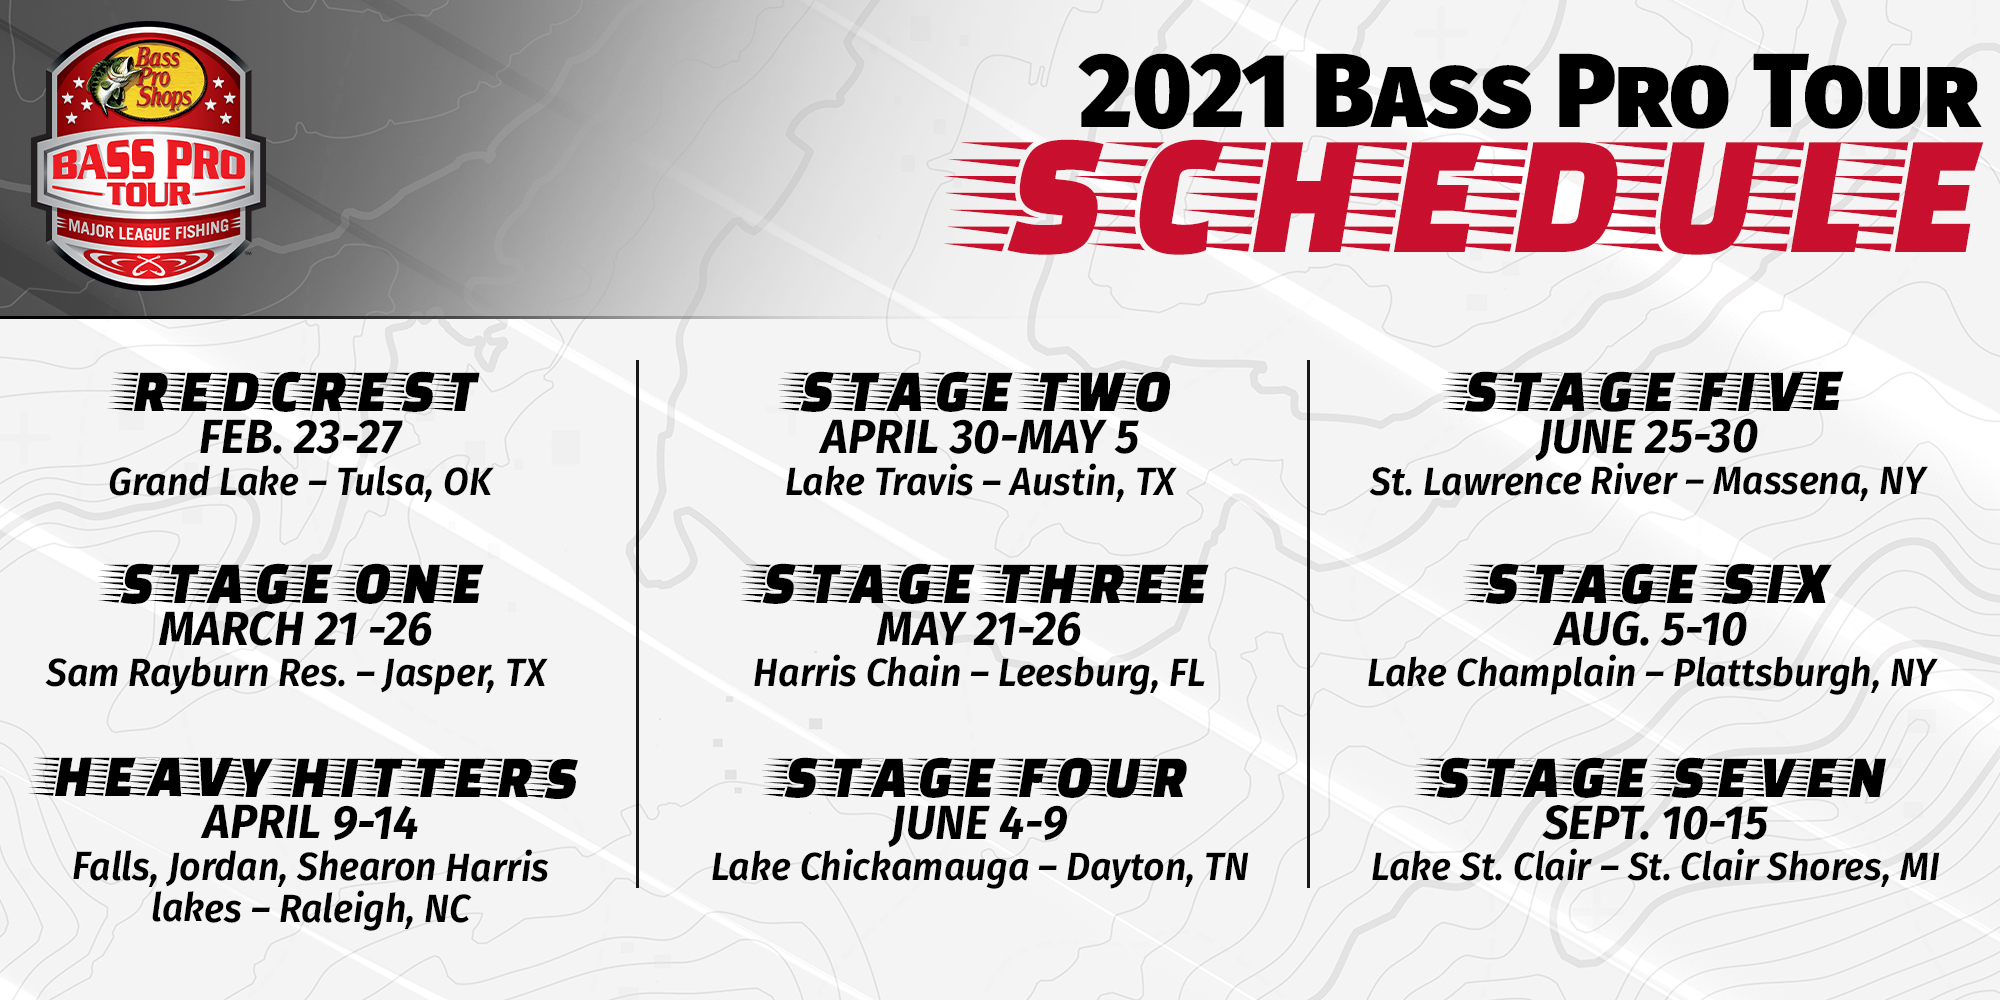 MLF Bass Pro Tour schedule 2021 · The Official Web Site of Kevin